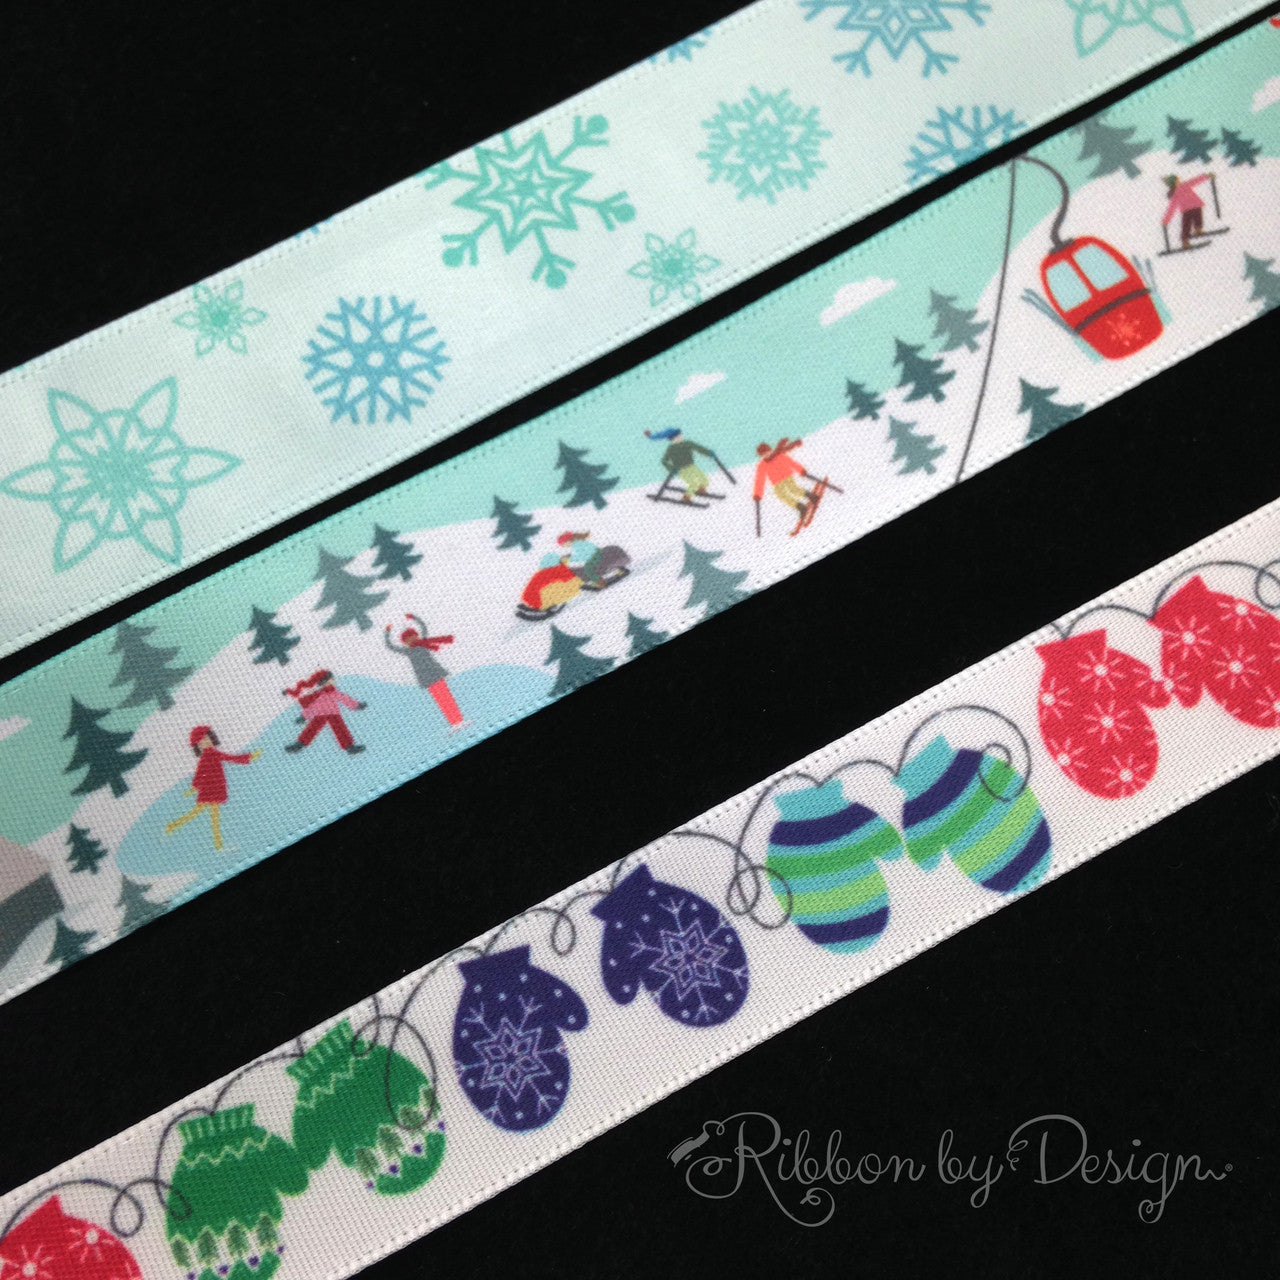 Combining our ribbons to created a theme is so much fun! These three make the perfect Winter Wonderland!